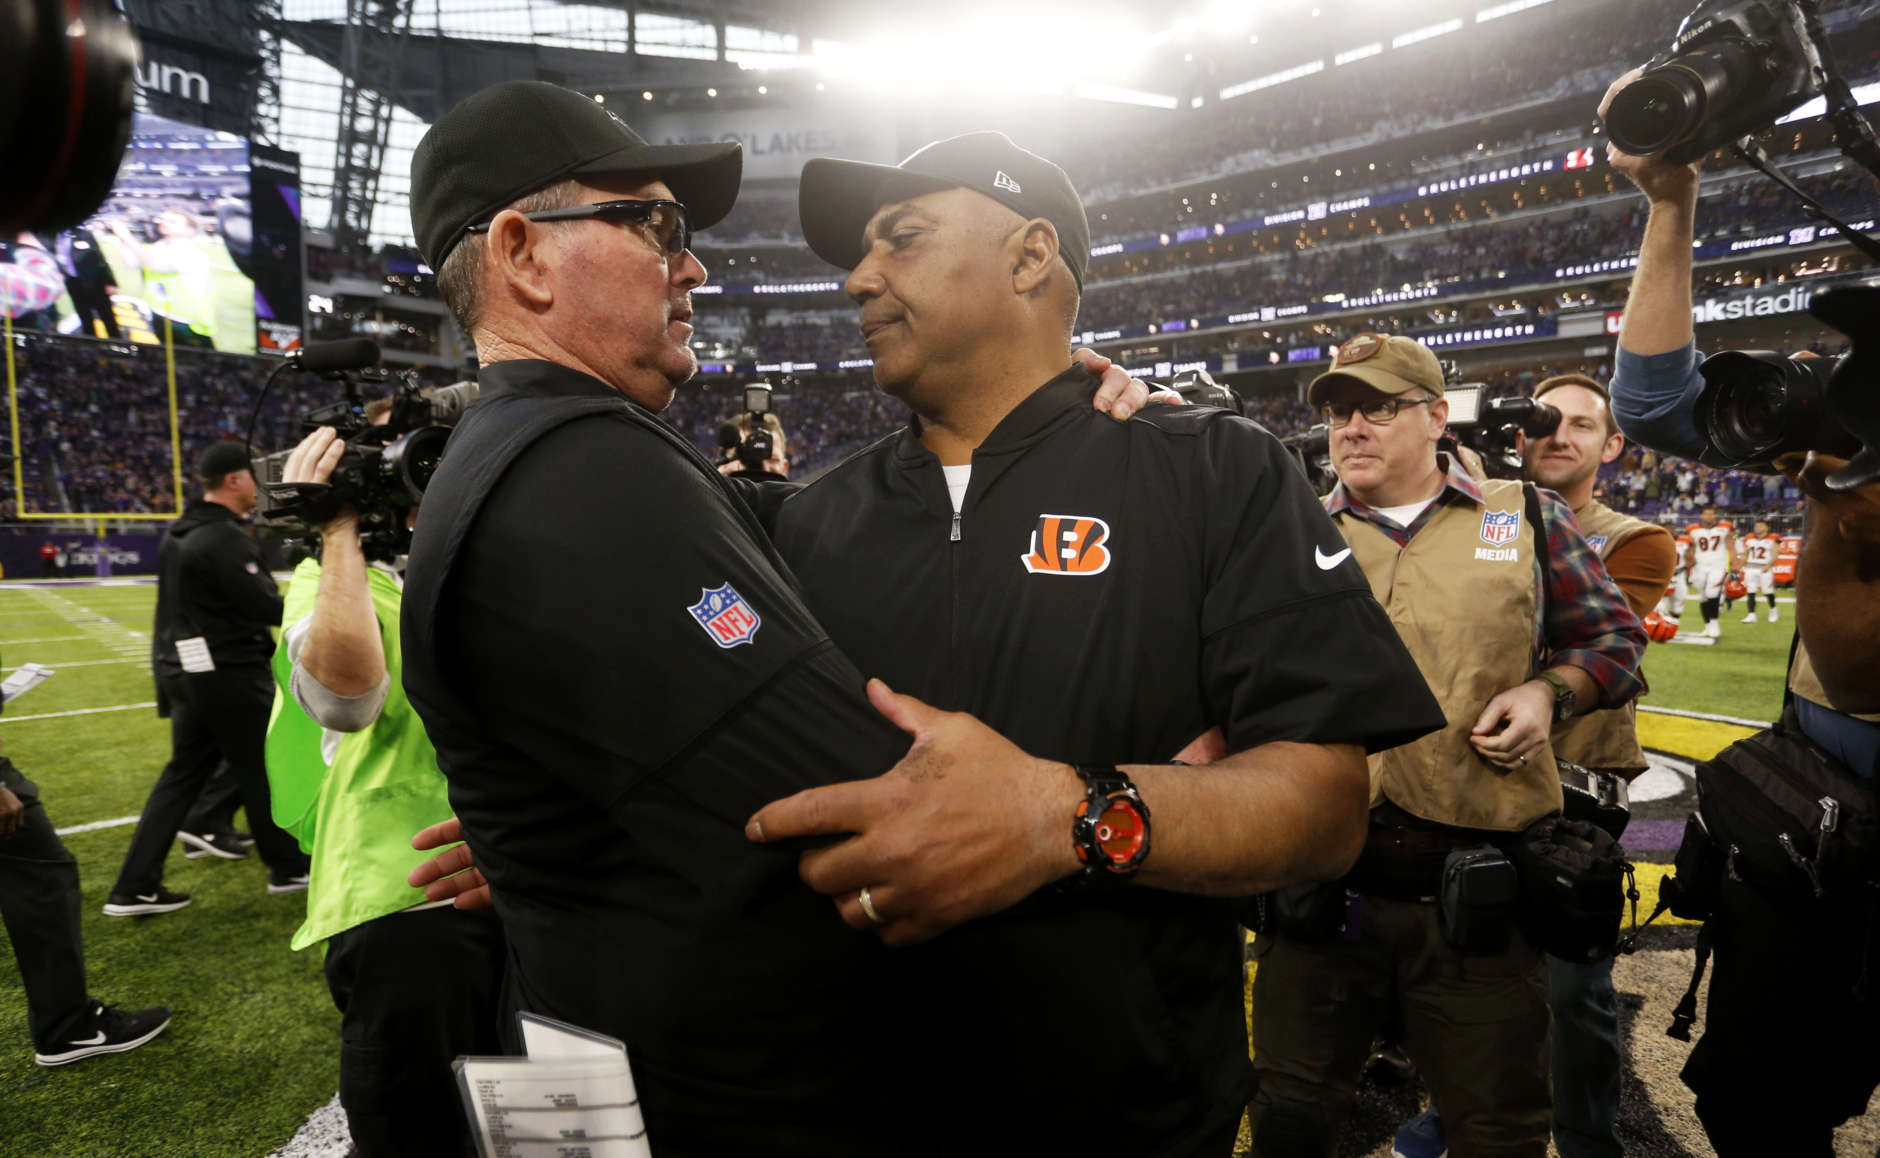 Cincinnati Bengals head coach Marvin Lewis, front right, talks with Minnesota Vikings head coach Mike Zimmer, left, after an NFL football game, Sunday, Dec. 17, 2017, in Minneapolis. (AP Photo/Bruce Kluckhohn)